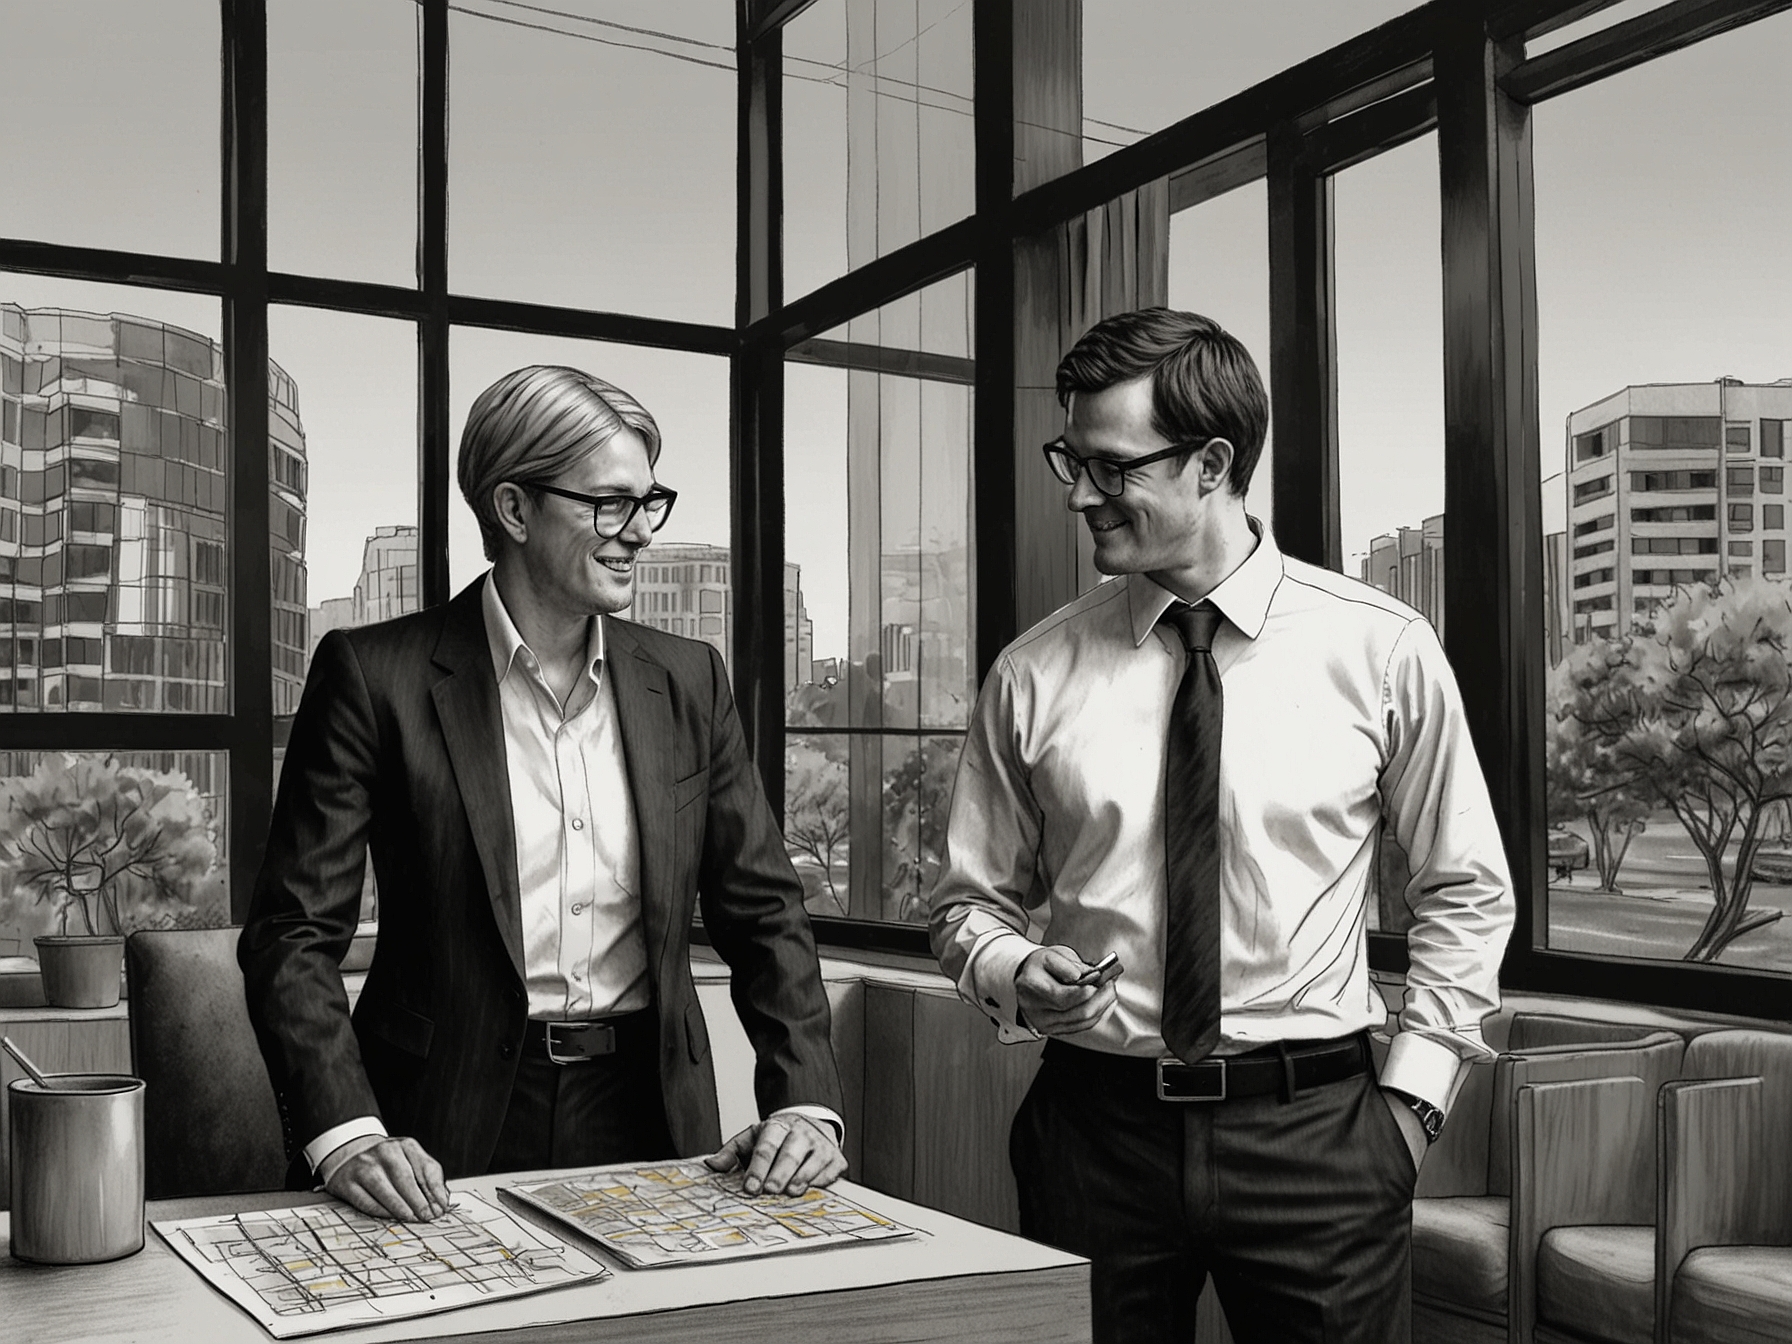 A Commonwealth Bank of Australia representative discussing customized financial solutions with a real estate developer, highlighting the bank’s tailored approach and commitment to client needs.